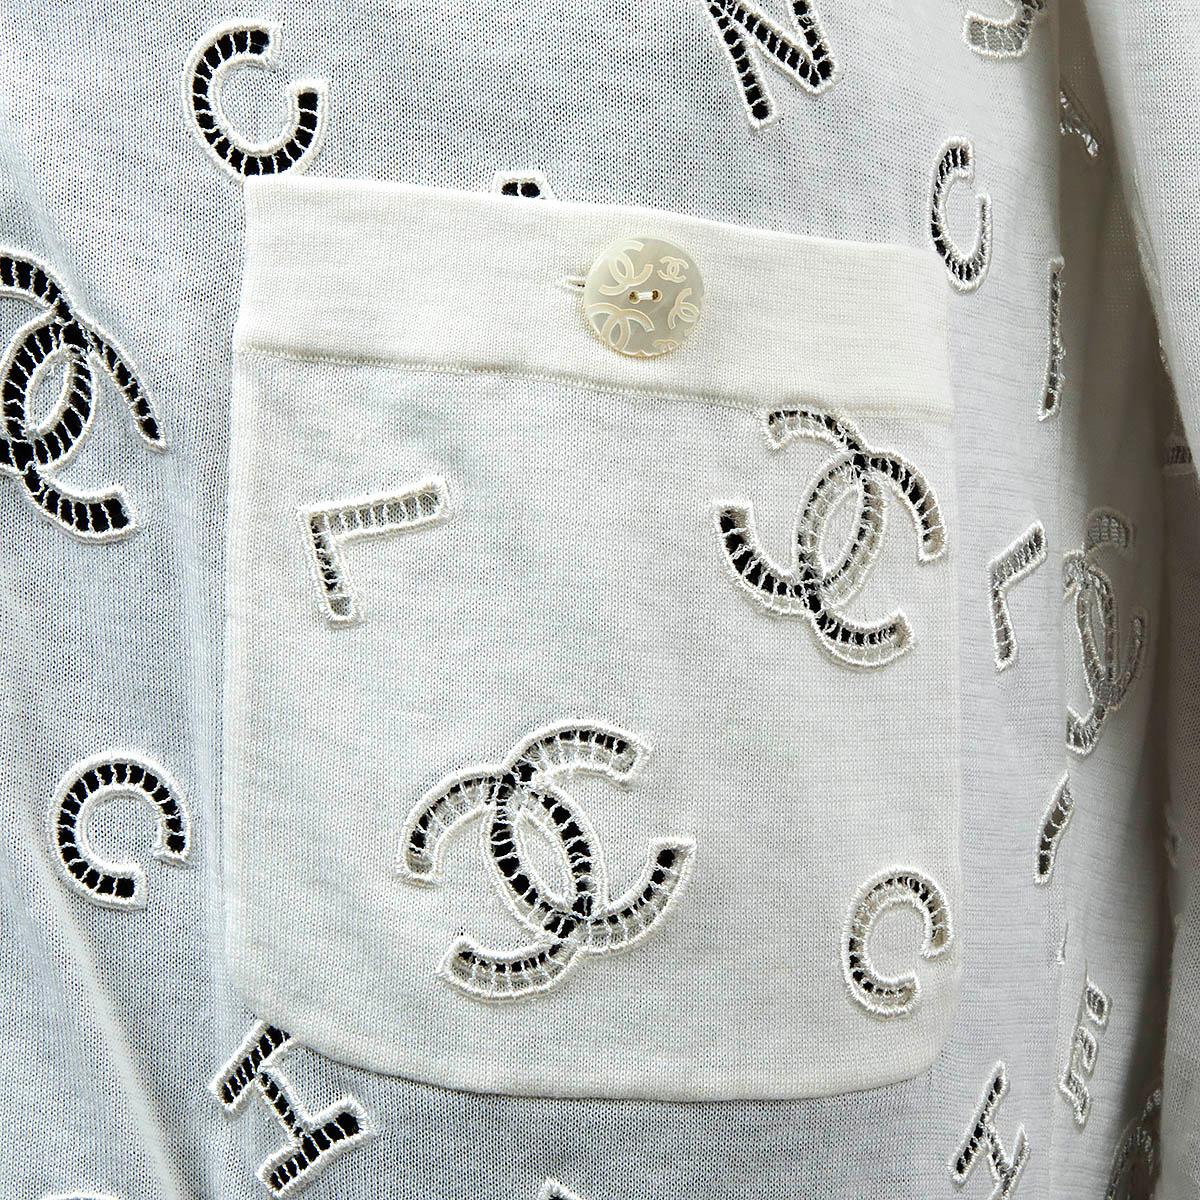 CHANEL ivory cotton 2020 20C LOGO EMBROIDERED Cardigan Sweater 38 S 4